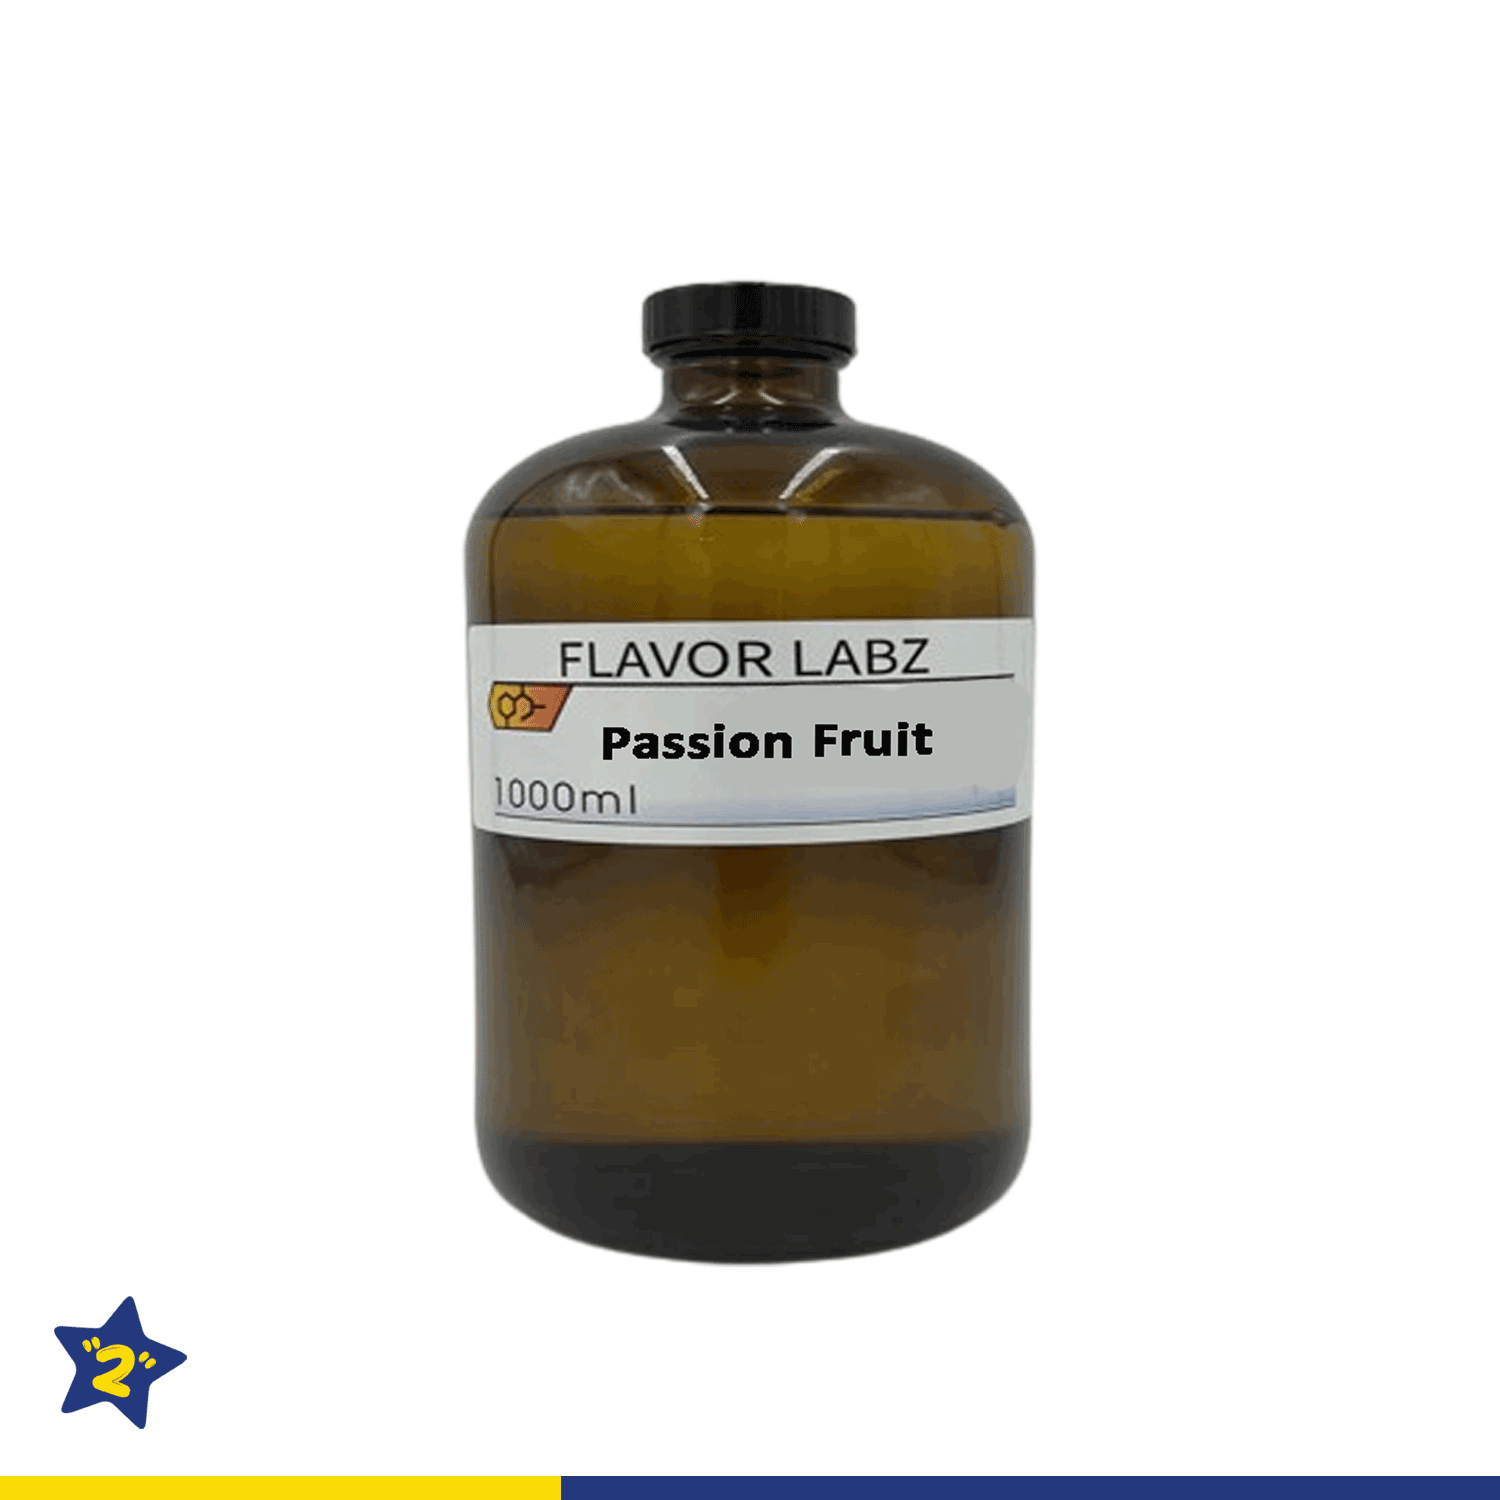 FlavorLabs Fruity Flavor Passion Fruit